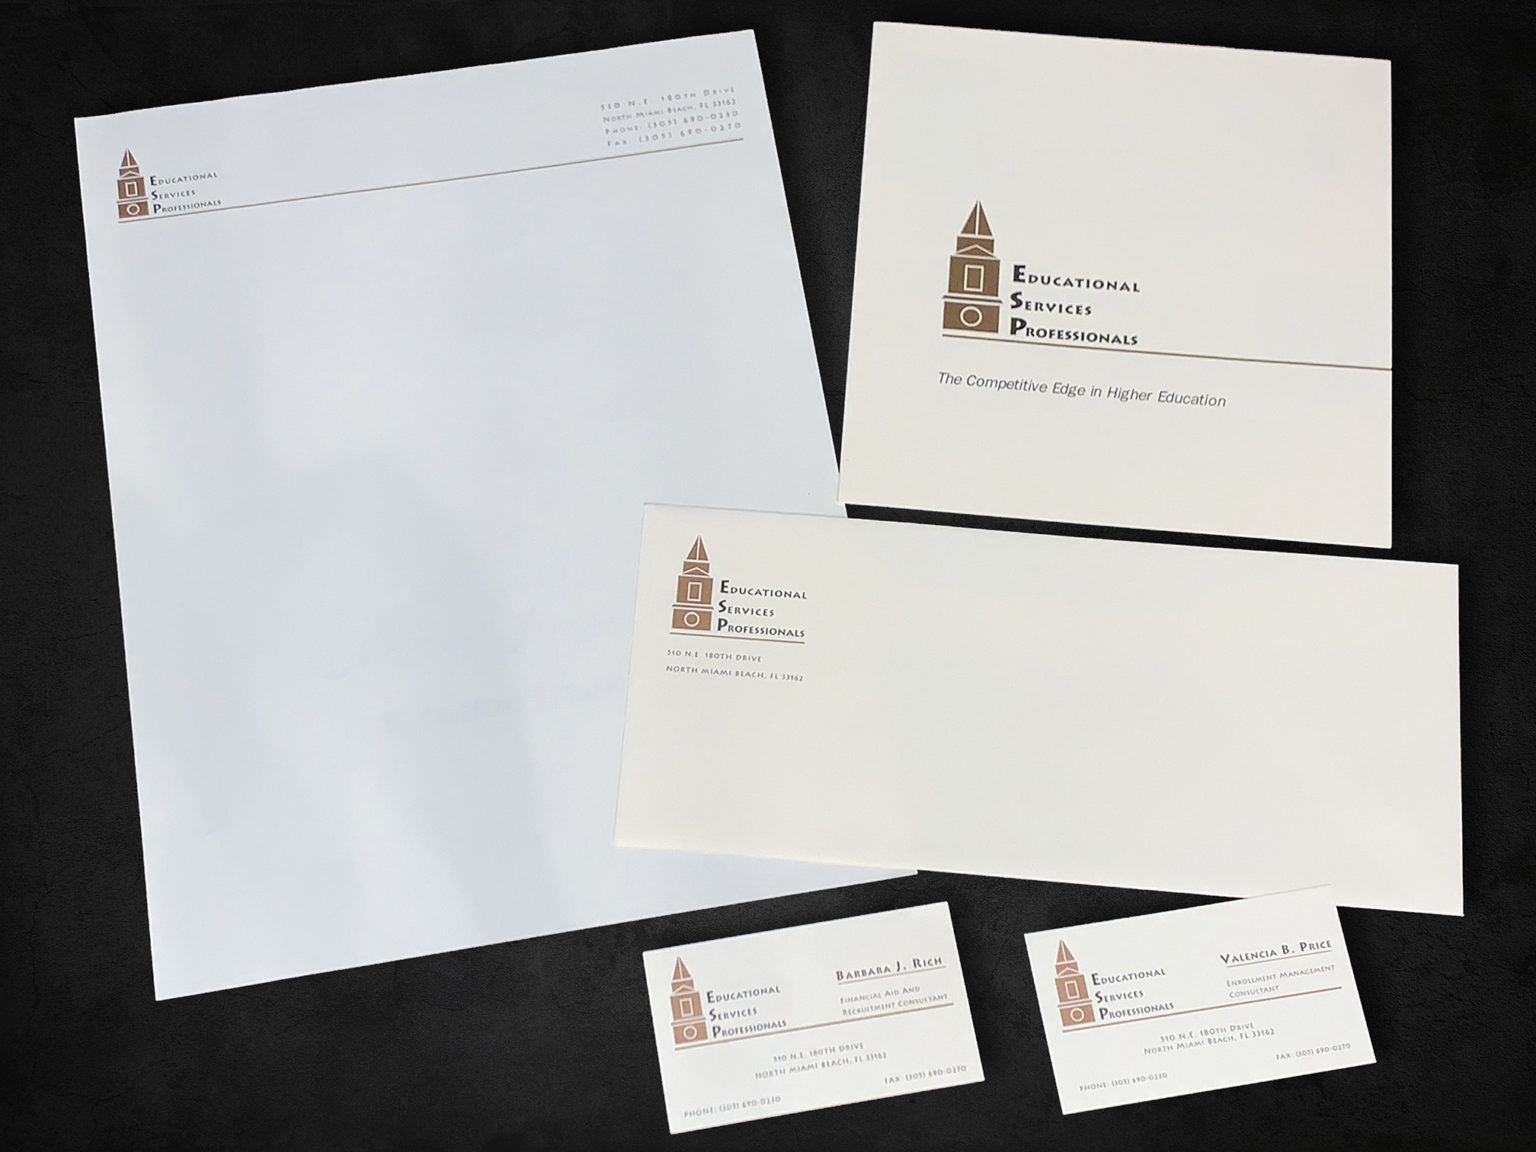 Educational Services Professionals Corporate Identity and Letterhead • Designed by: Designs In Motion, Inc.